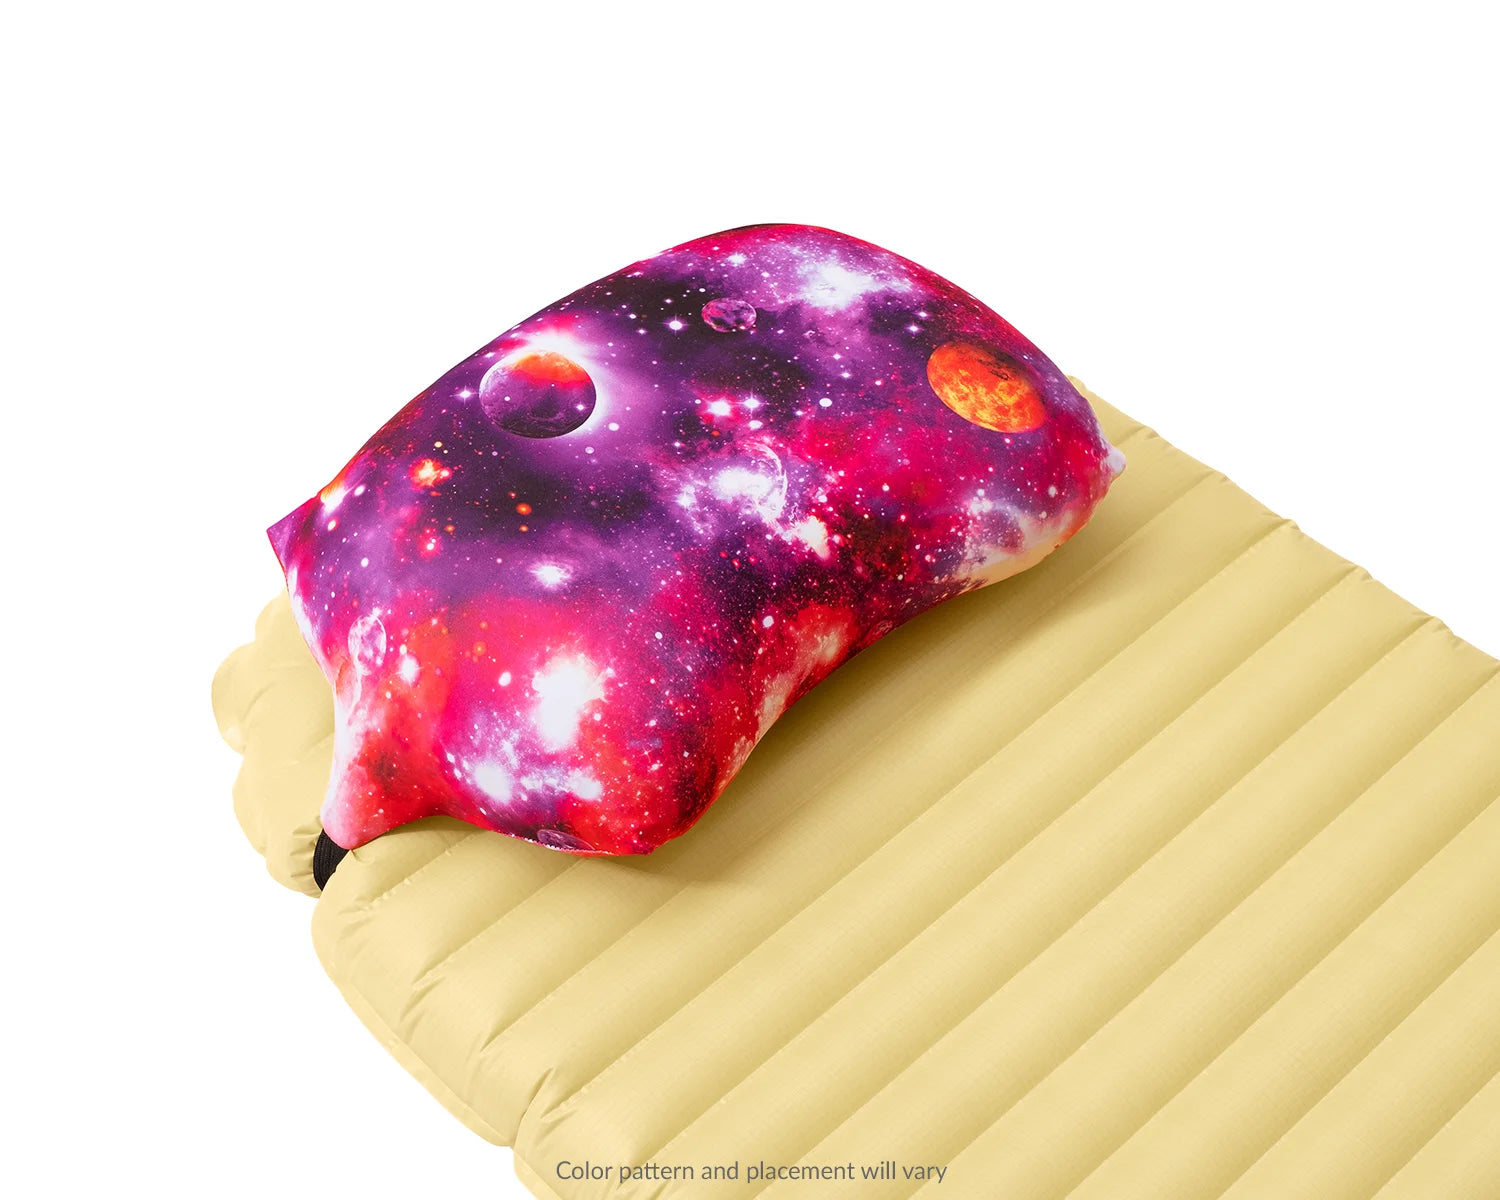 Pillow Strap small size camping pillow case in galaxy on a sleeping pad. Three quarter view.